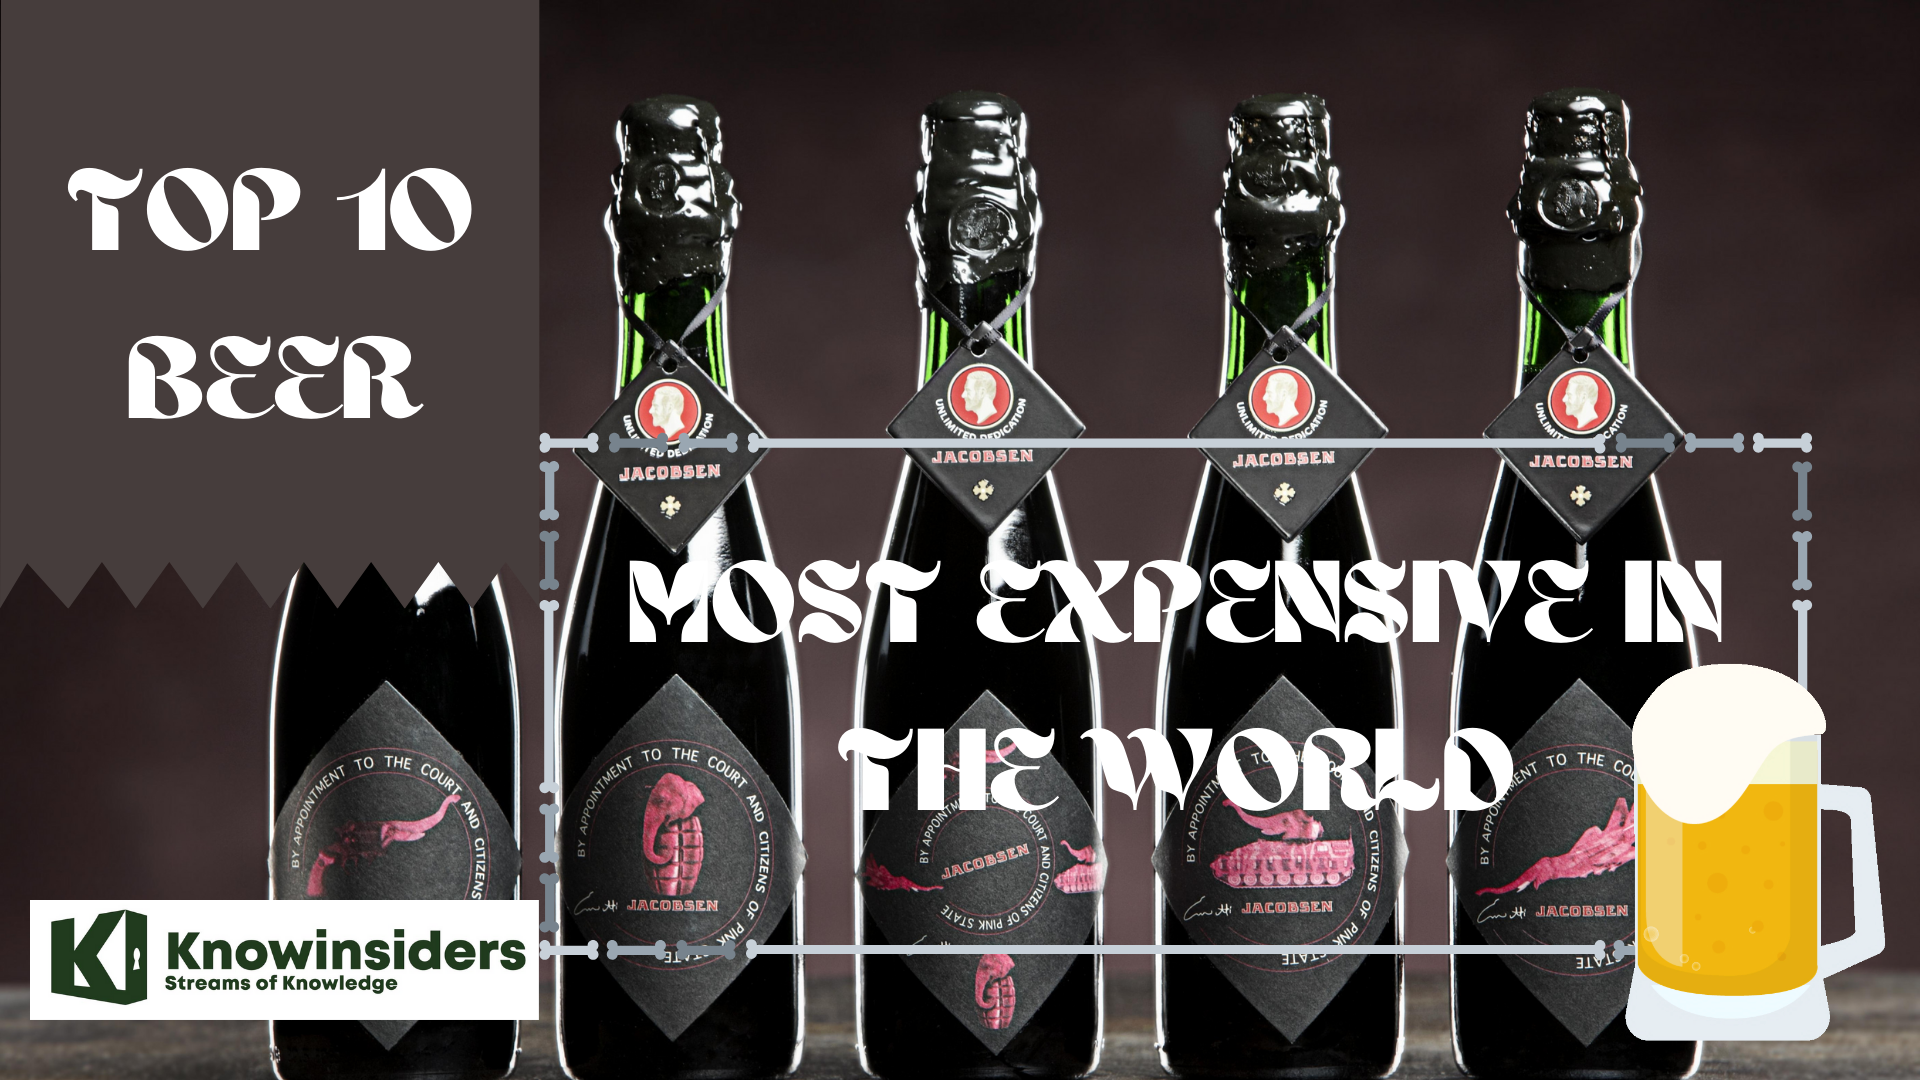 Top 10 Beers - Most Expensive In The World | KnowInsiders